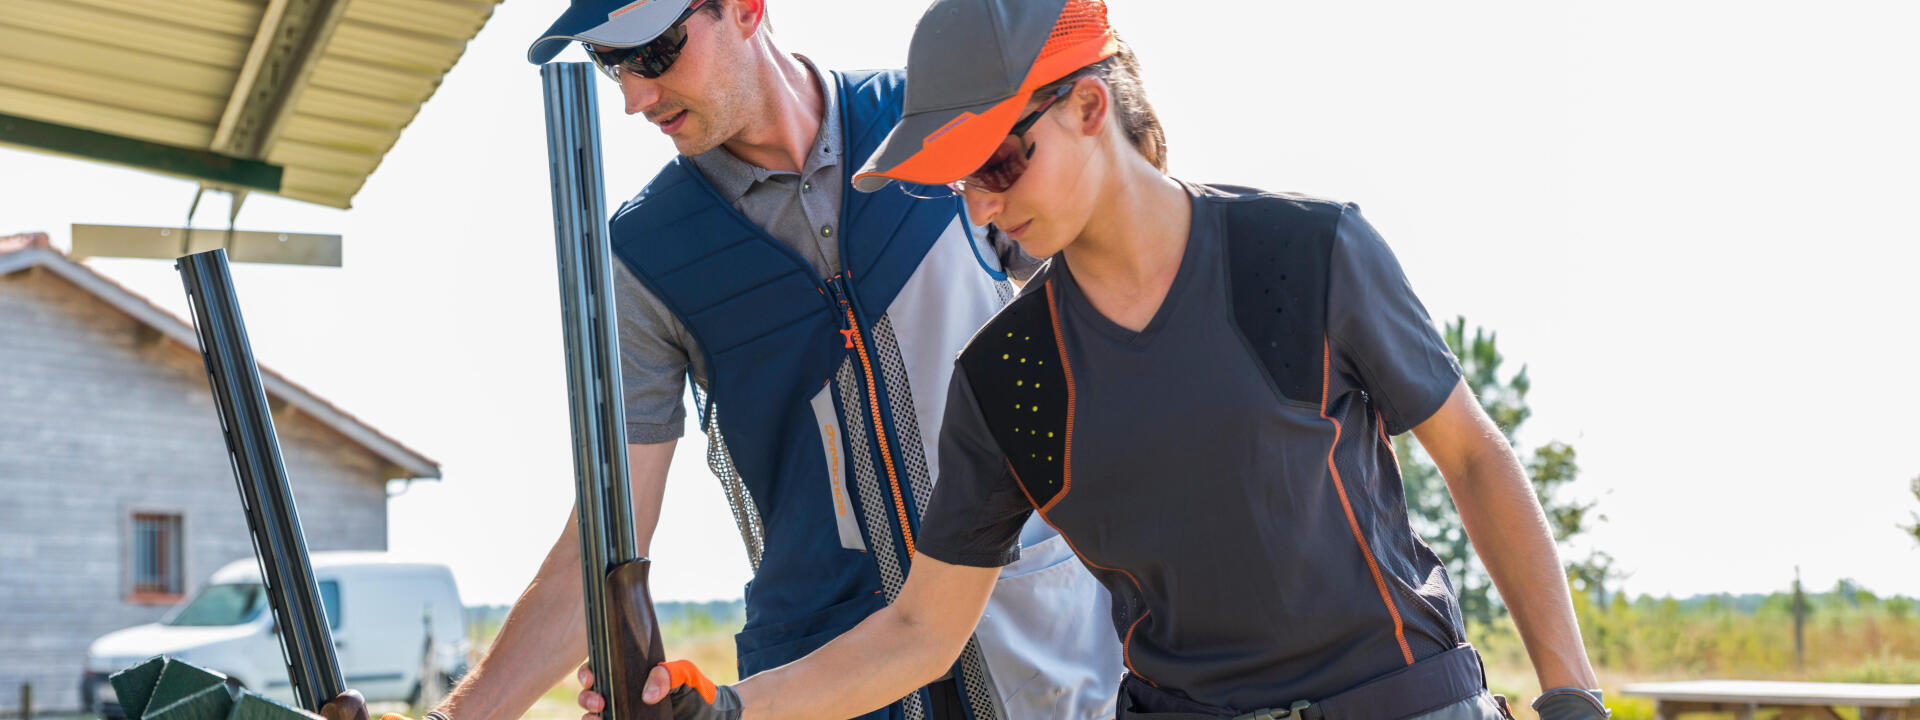 HOW TO START CLAY PIGEON SHOOTING